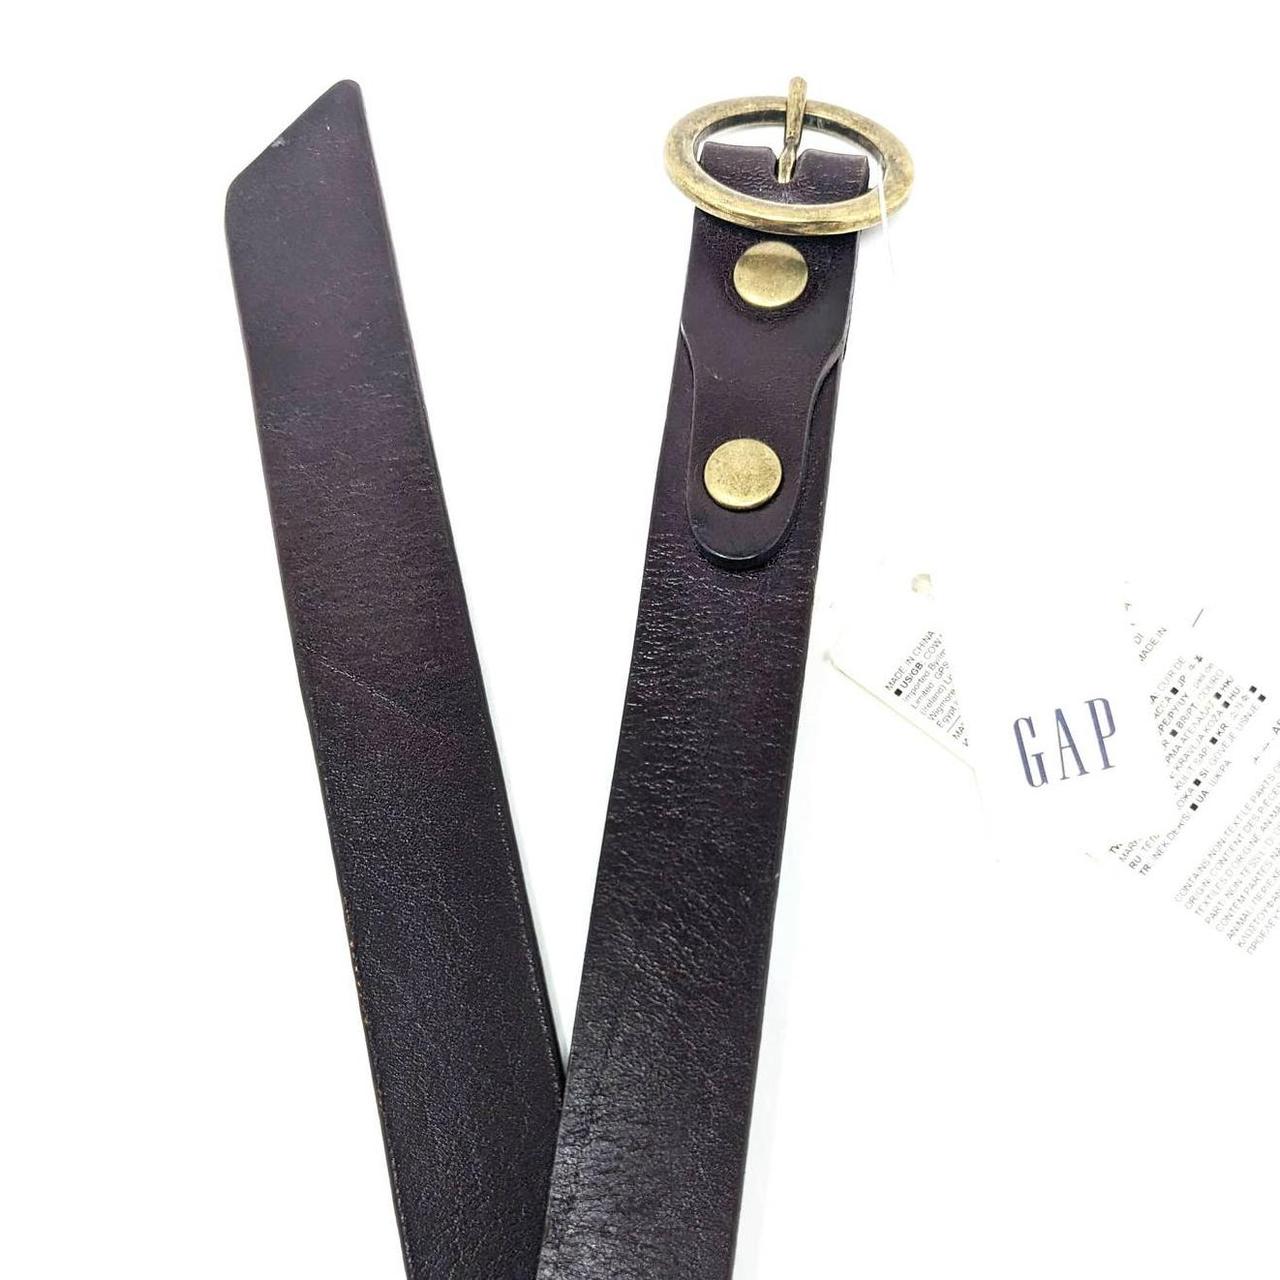 New Gap Belt Womens Small Brown Leather O Ring Gold...